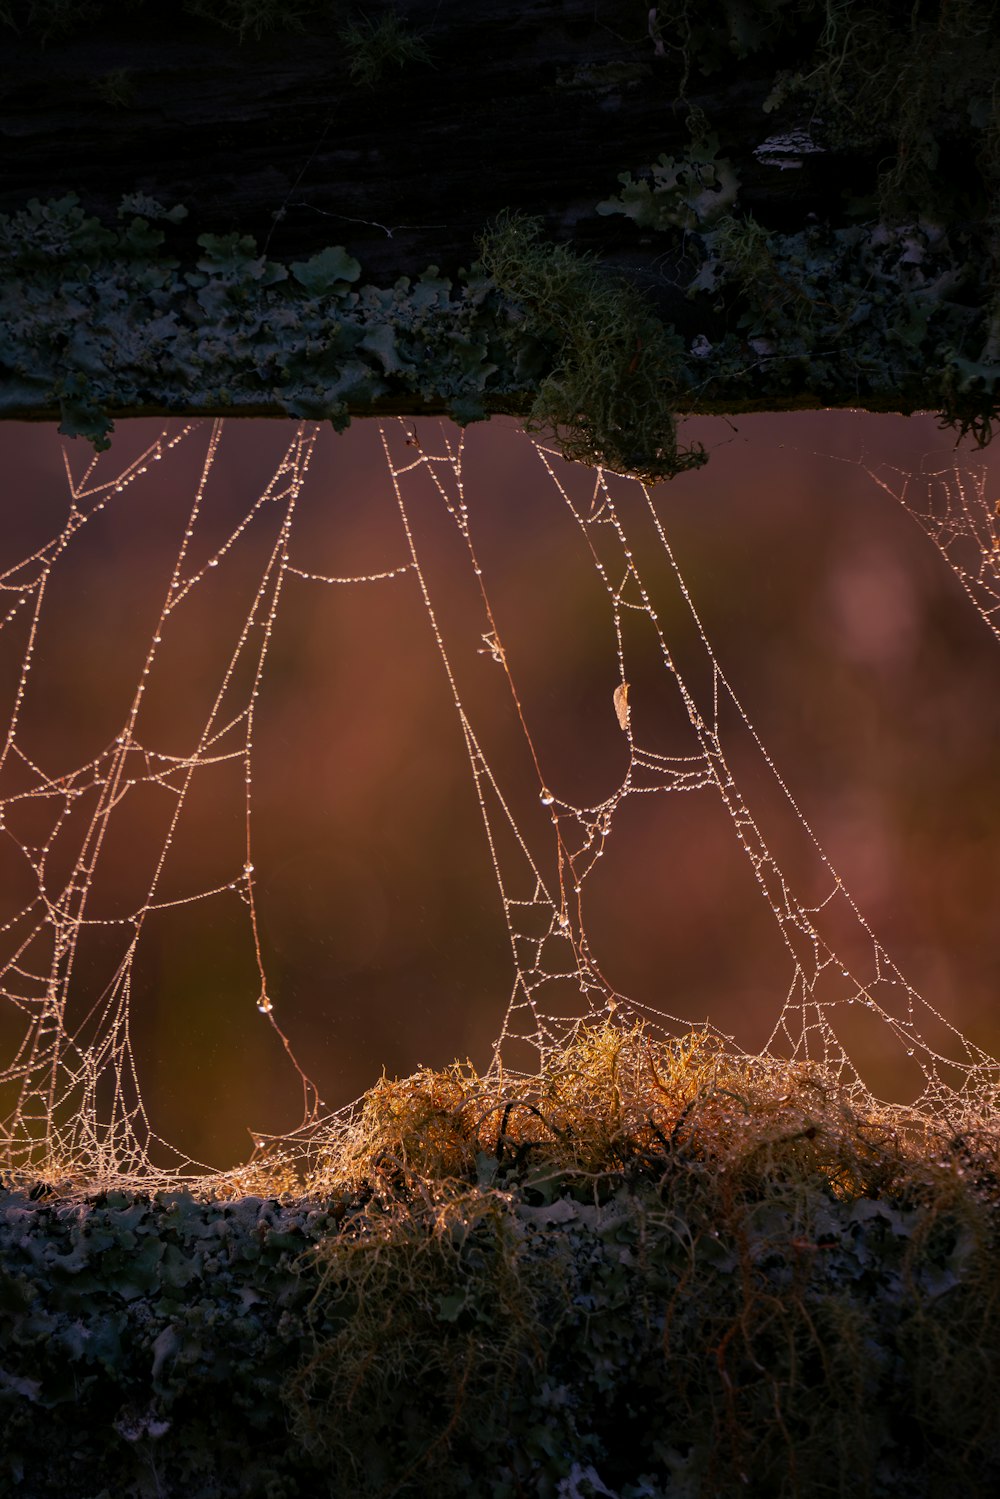 a close up of water droplets on a spider web